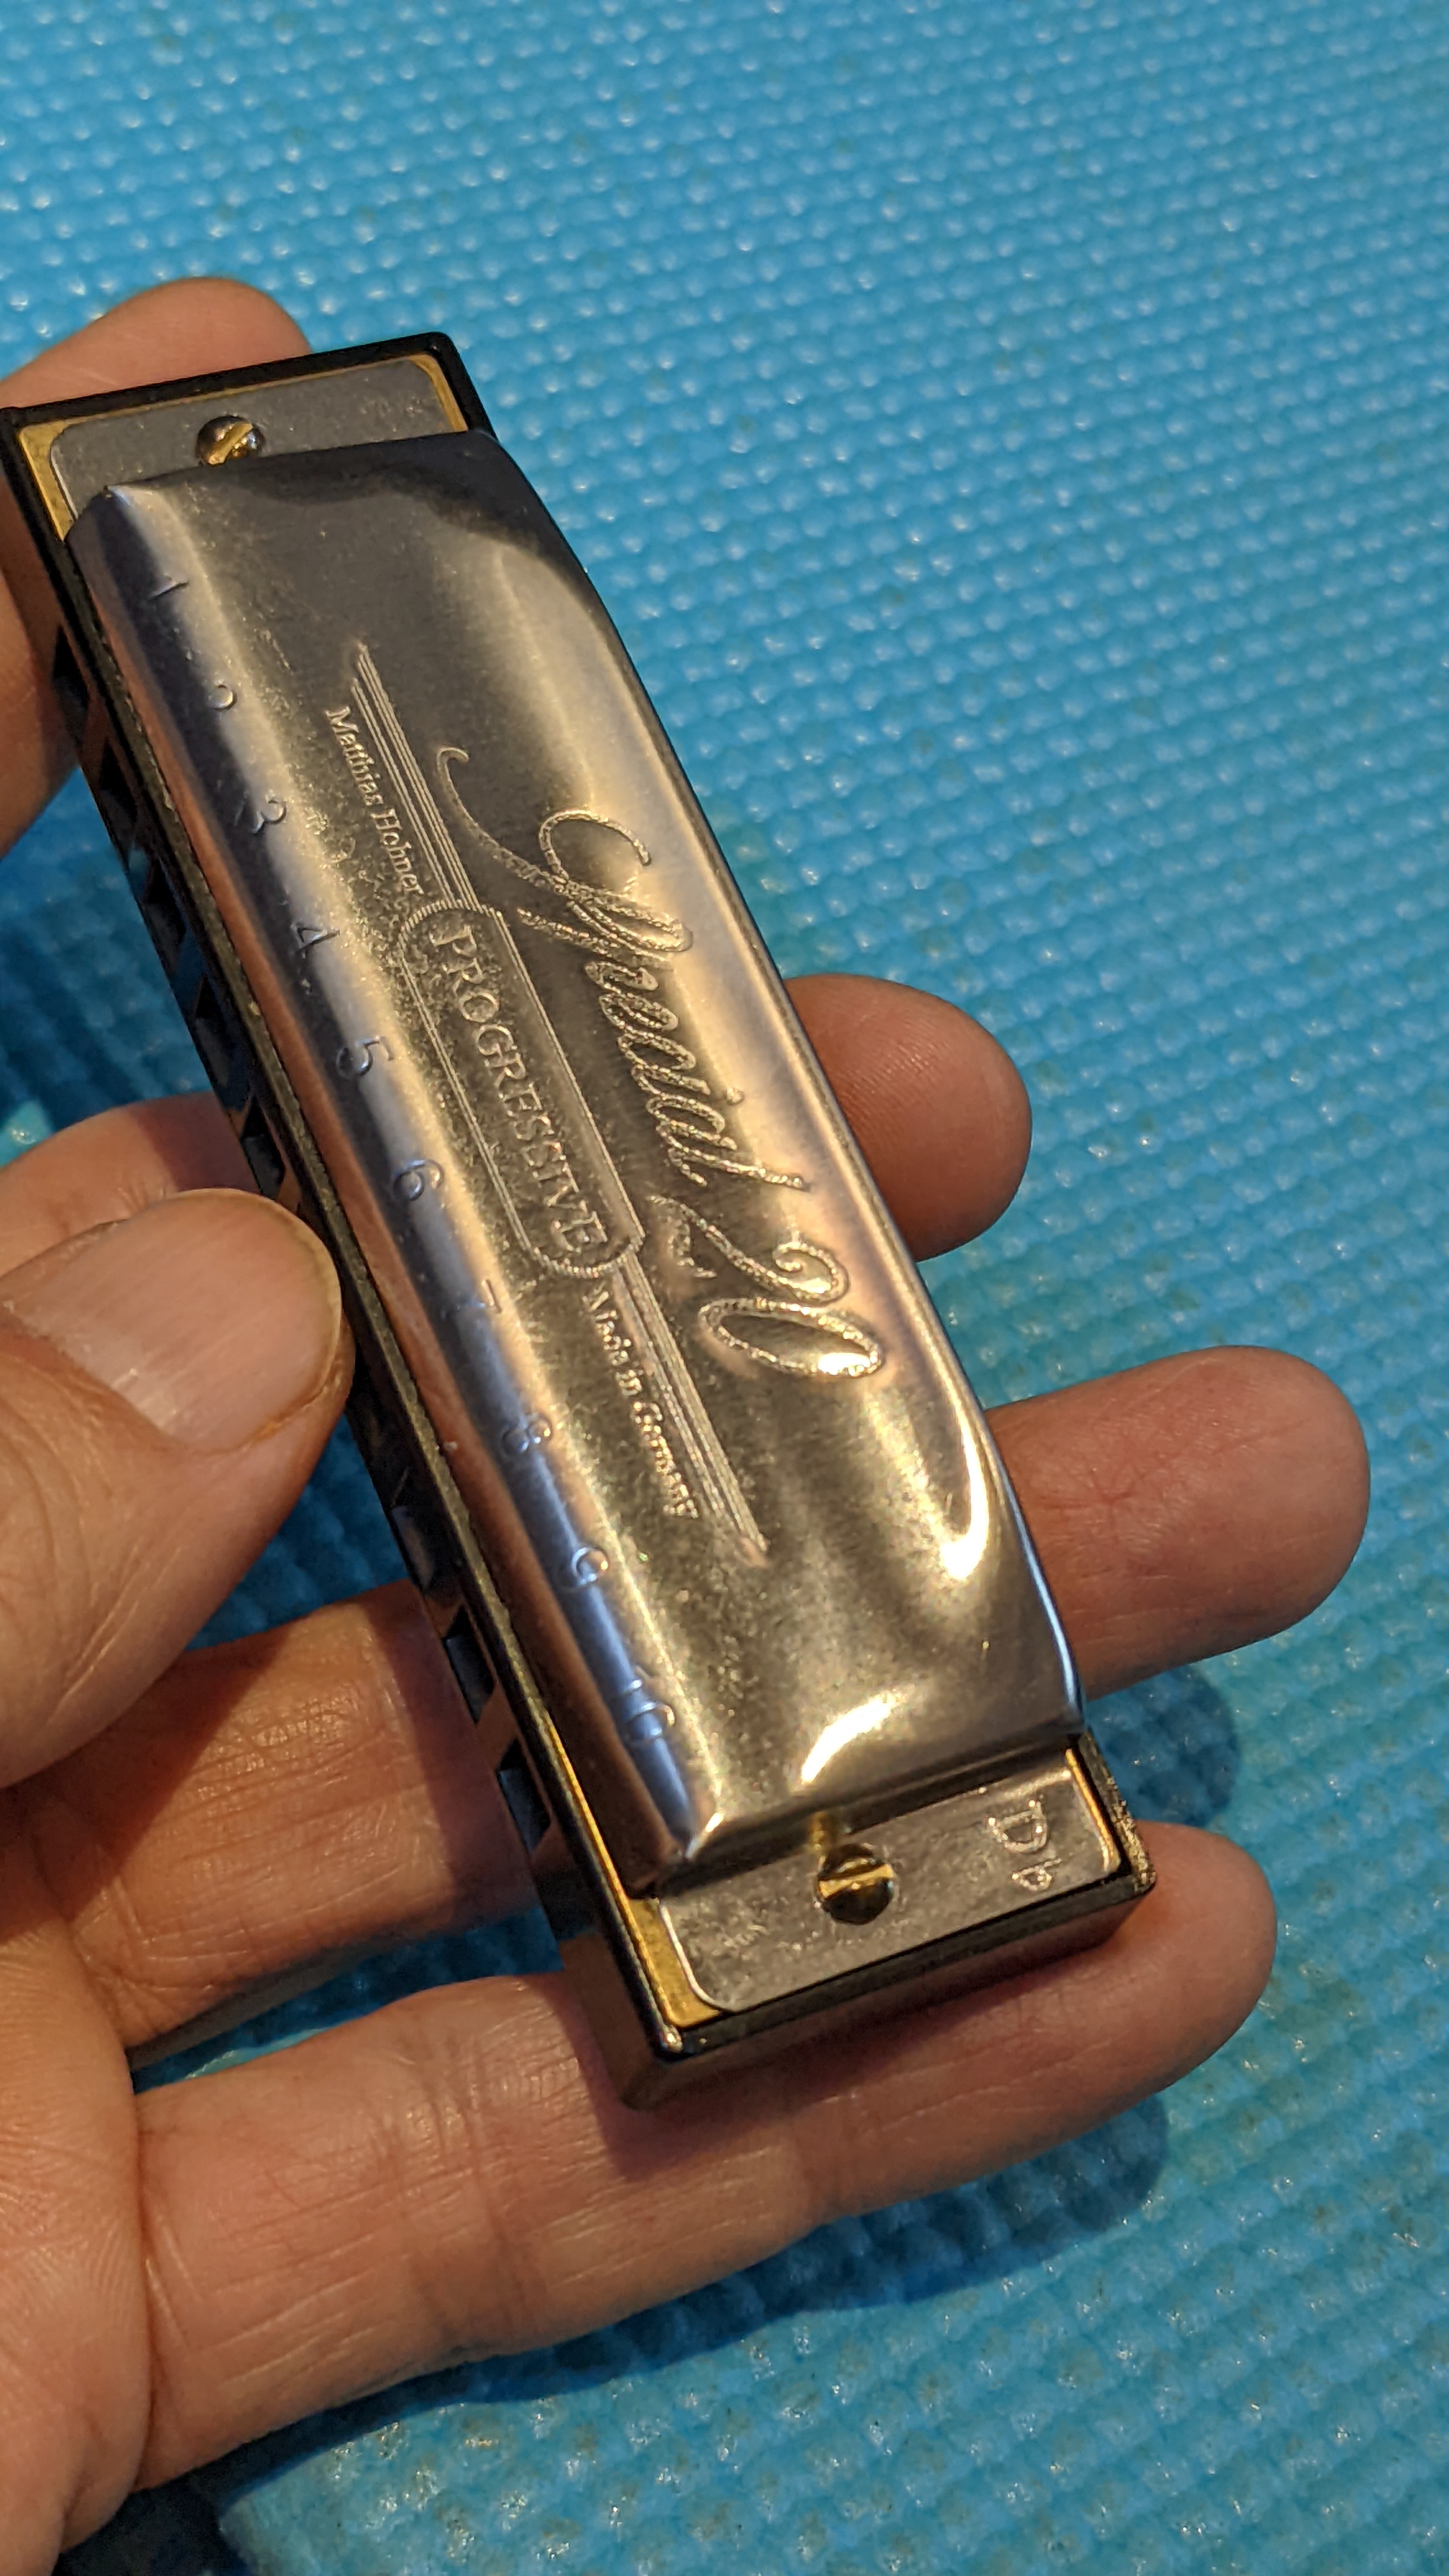 Hohner Special 20 in Db / Bad Luck or a Stroke of Luck? - Gear